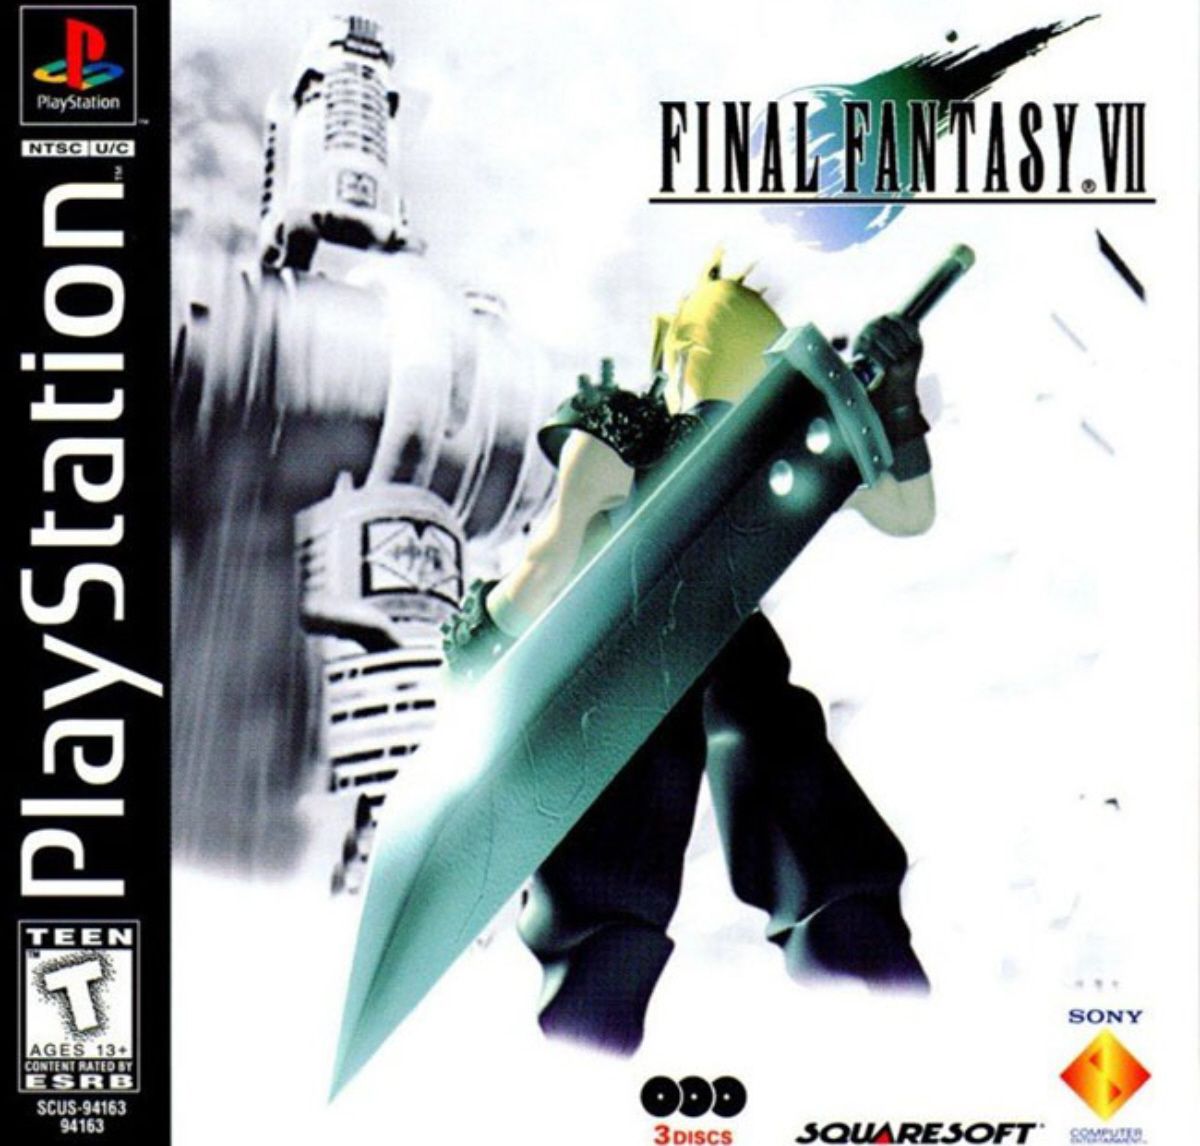 When Is Final Fantasy VII Remake Coming Out